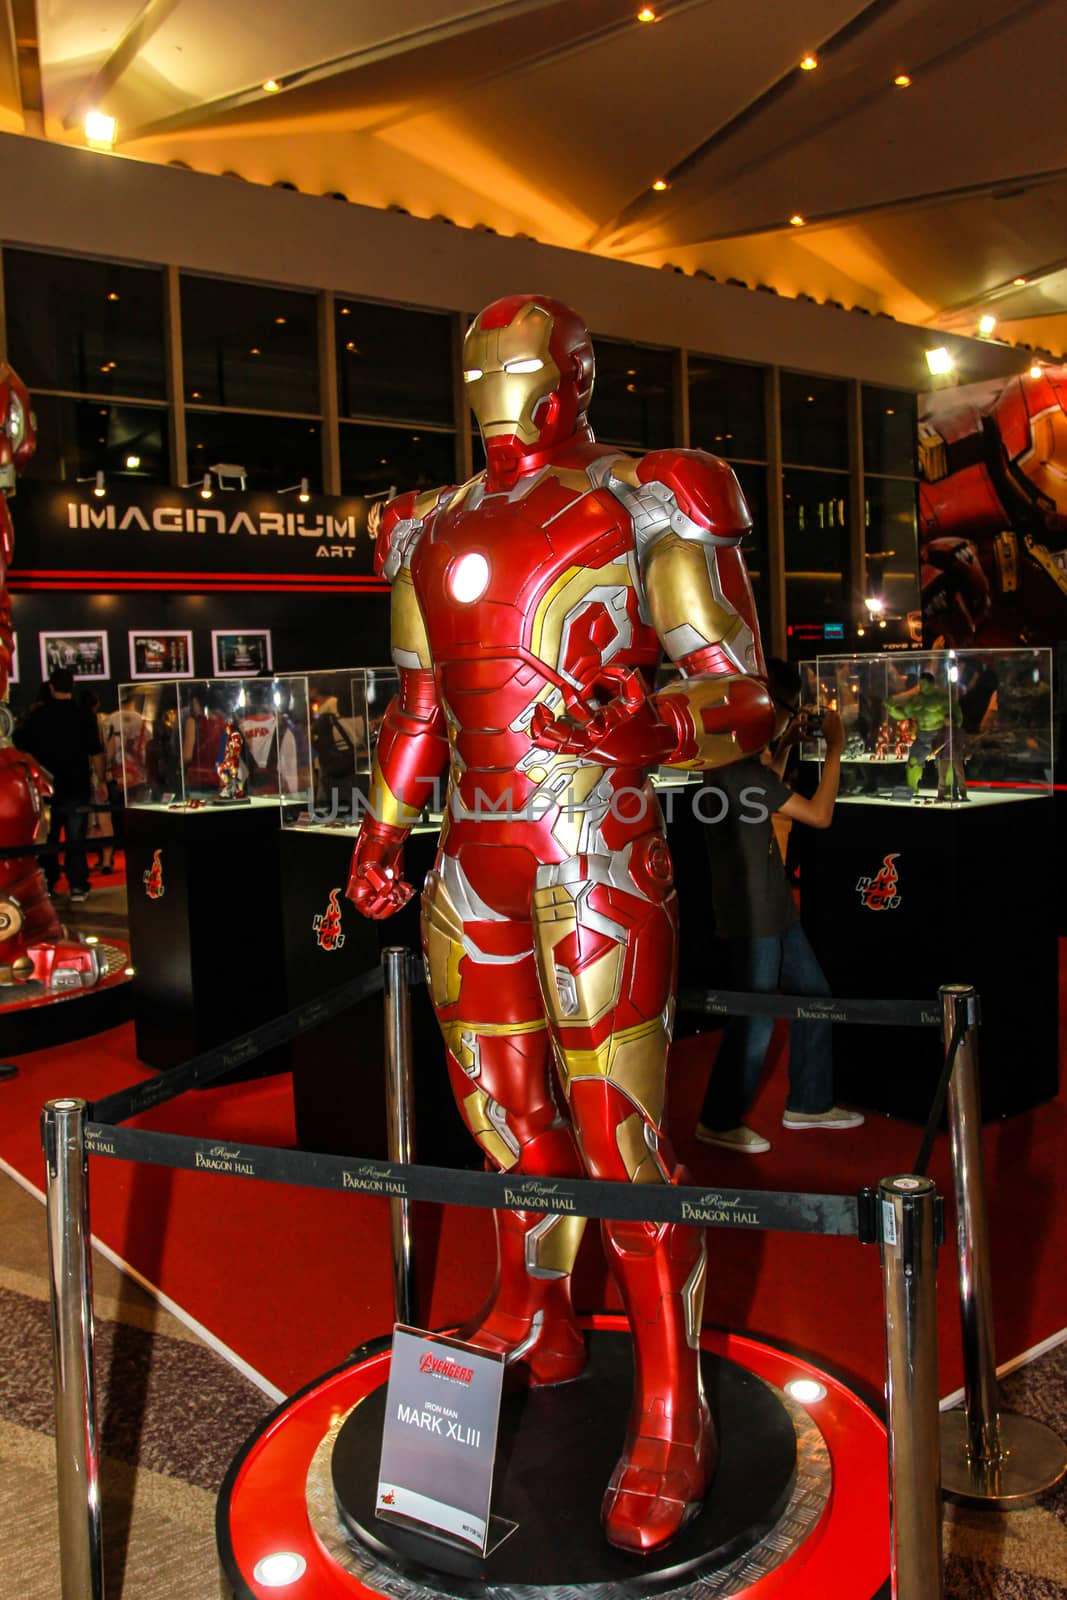 A model of the character Iron Man from the movies and comics by redthirteen